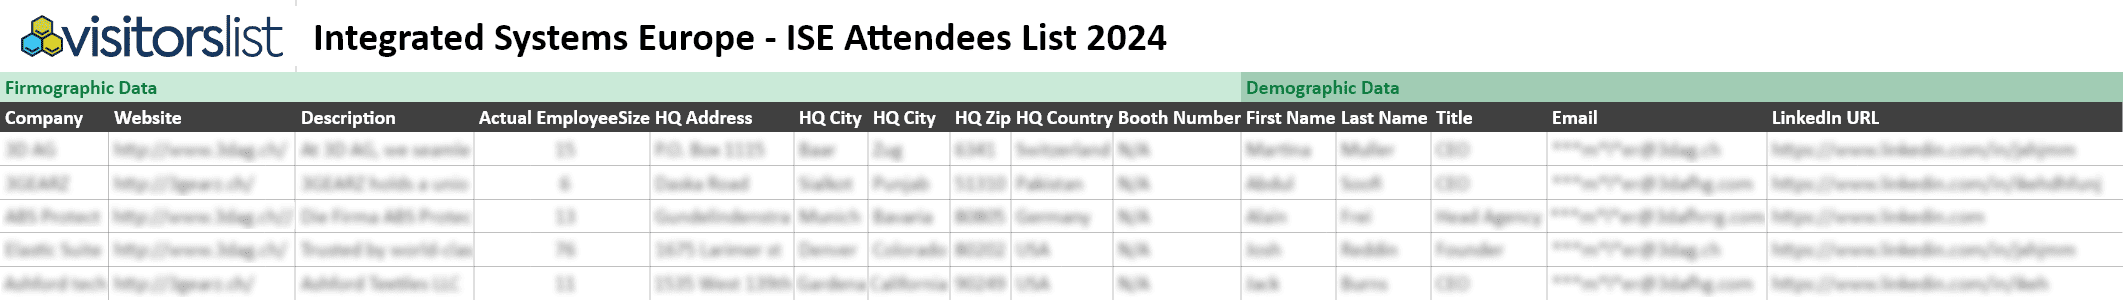 Integrated Systems Europe - ISE Attendees List 2024